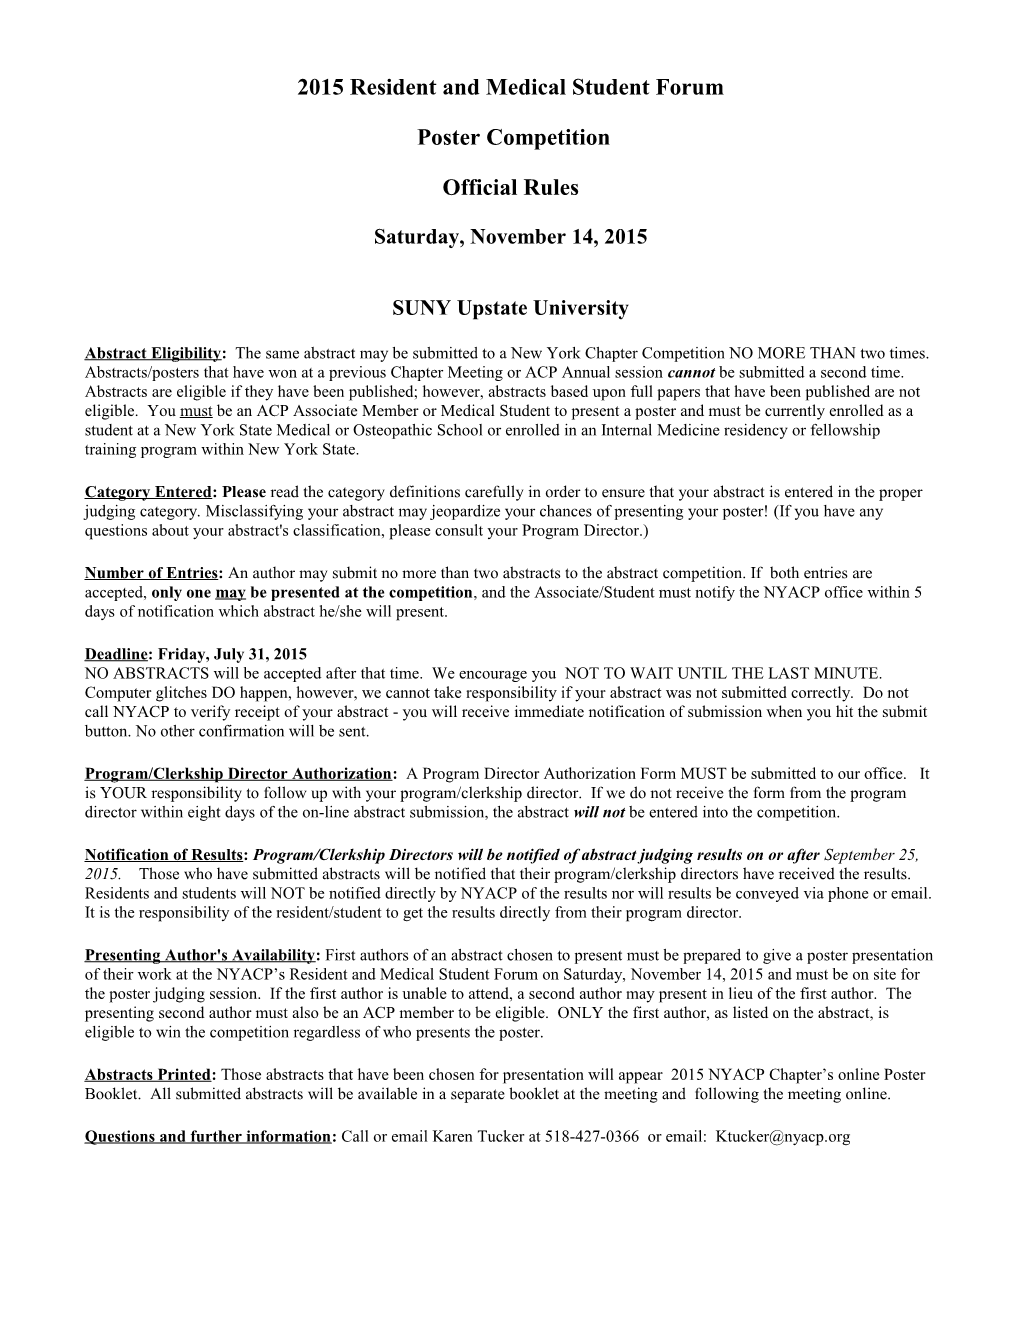 Official Rules for New York Chapter ACP Abstract Competitions s1